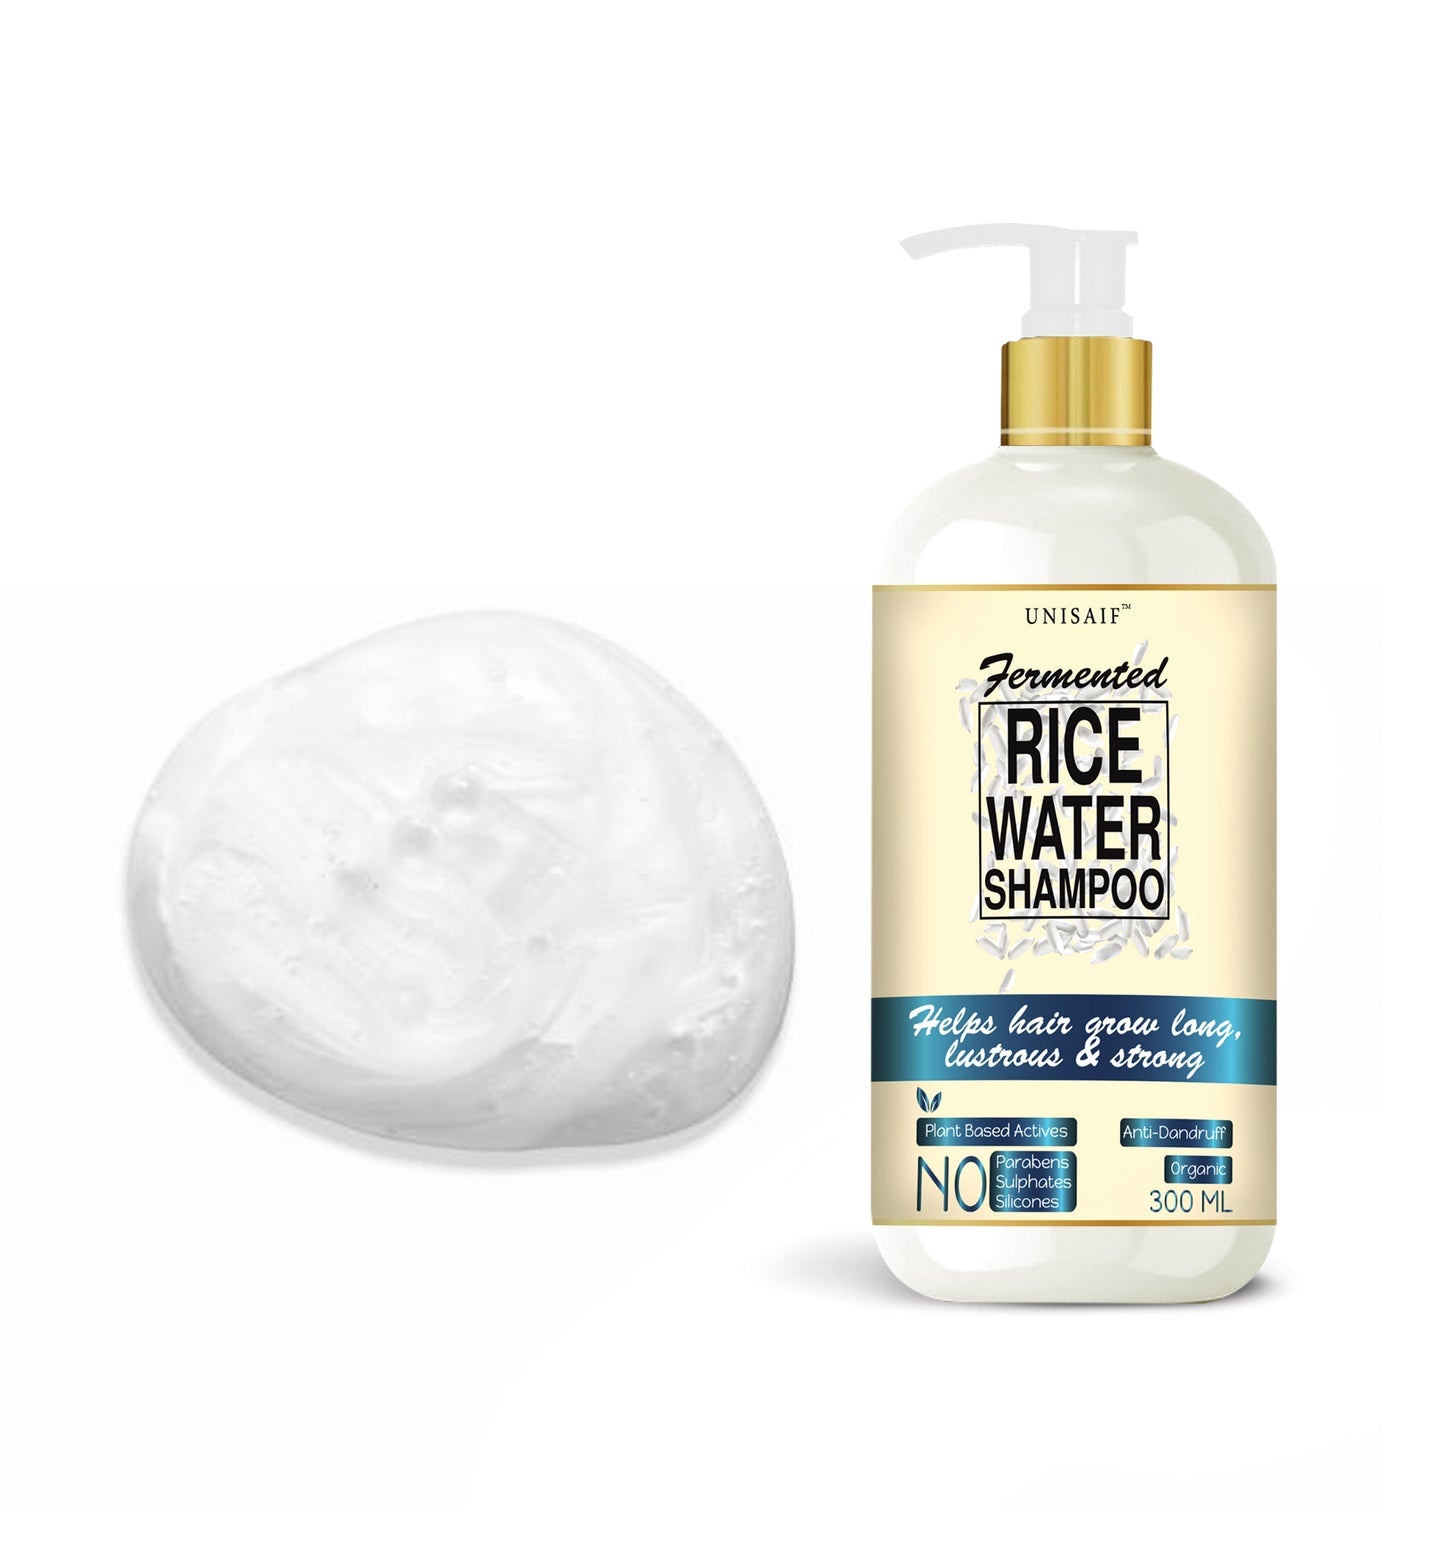 Fermented Rice Water Organic Shampoo (300ml) For Frizzy Hair| Increase Volume & Shine | Silky Texture| NO SULPHATE